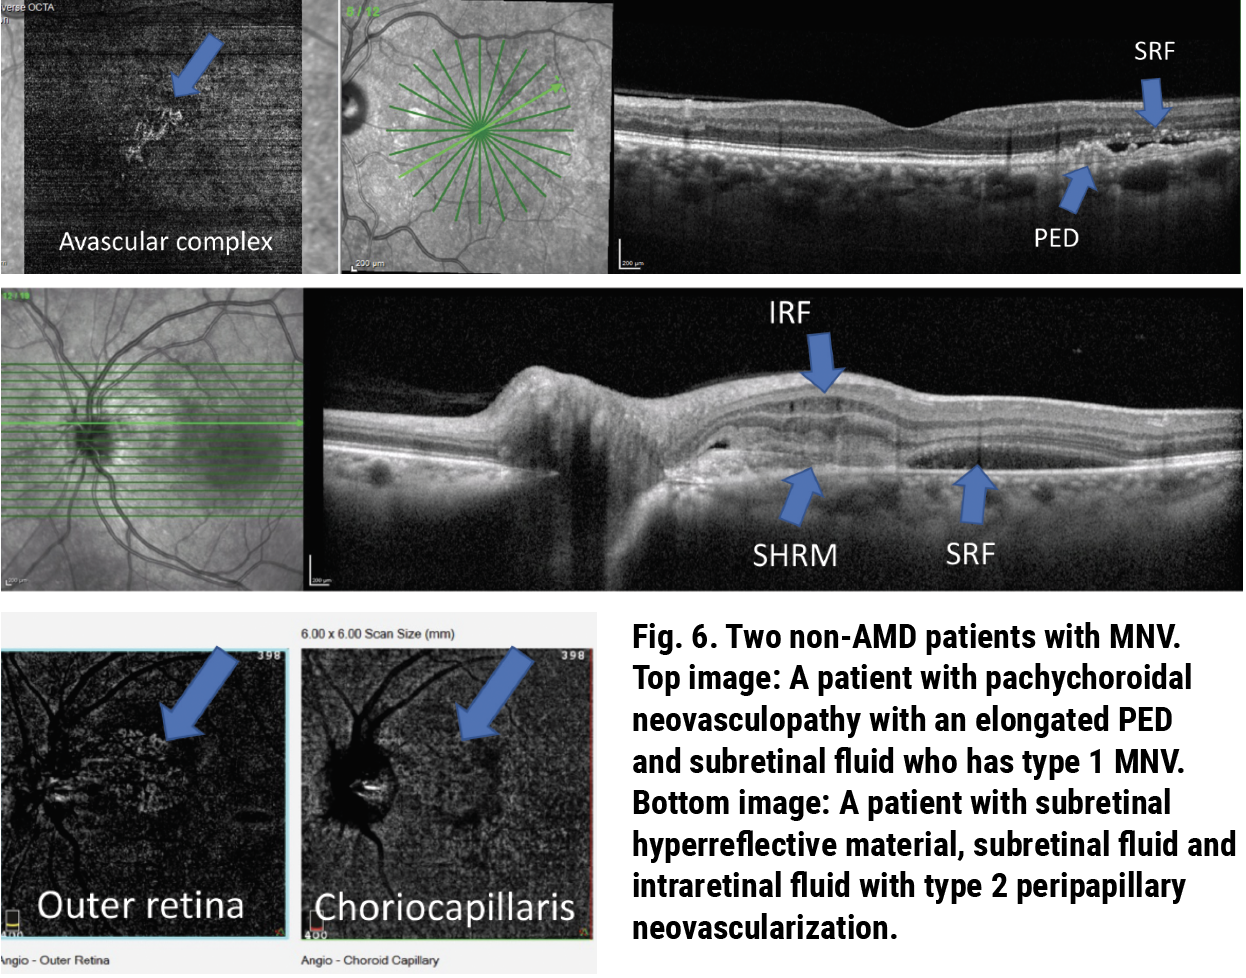 Fig. 6. Two non-AMD patients with MNV. Top image: A patient with pachychoroidal neovasculopathy with an elongated PED and subretinal fluid who has type 1 MNV. Bottom image: A patient with subretinal hyperreflective material, subretinal fluid and intraretinal fluid with type 2 peripapillary neovascularization.